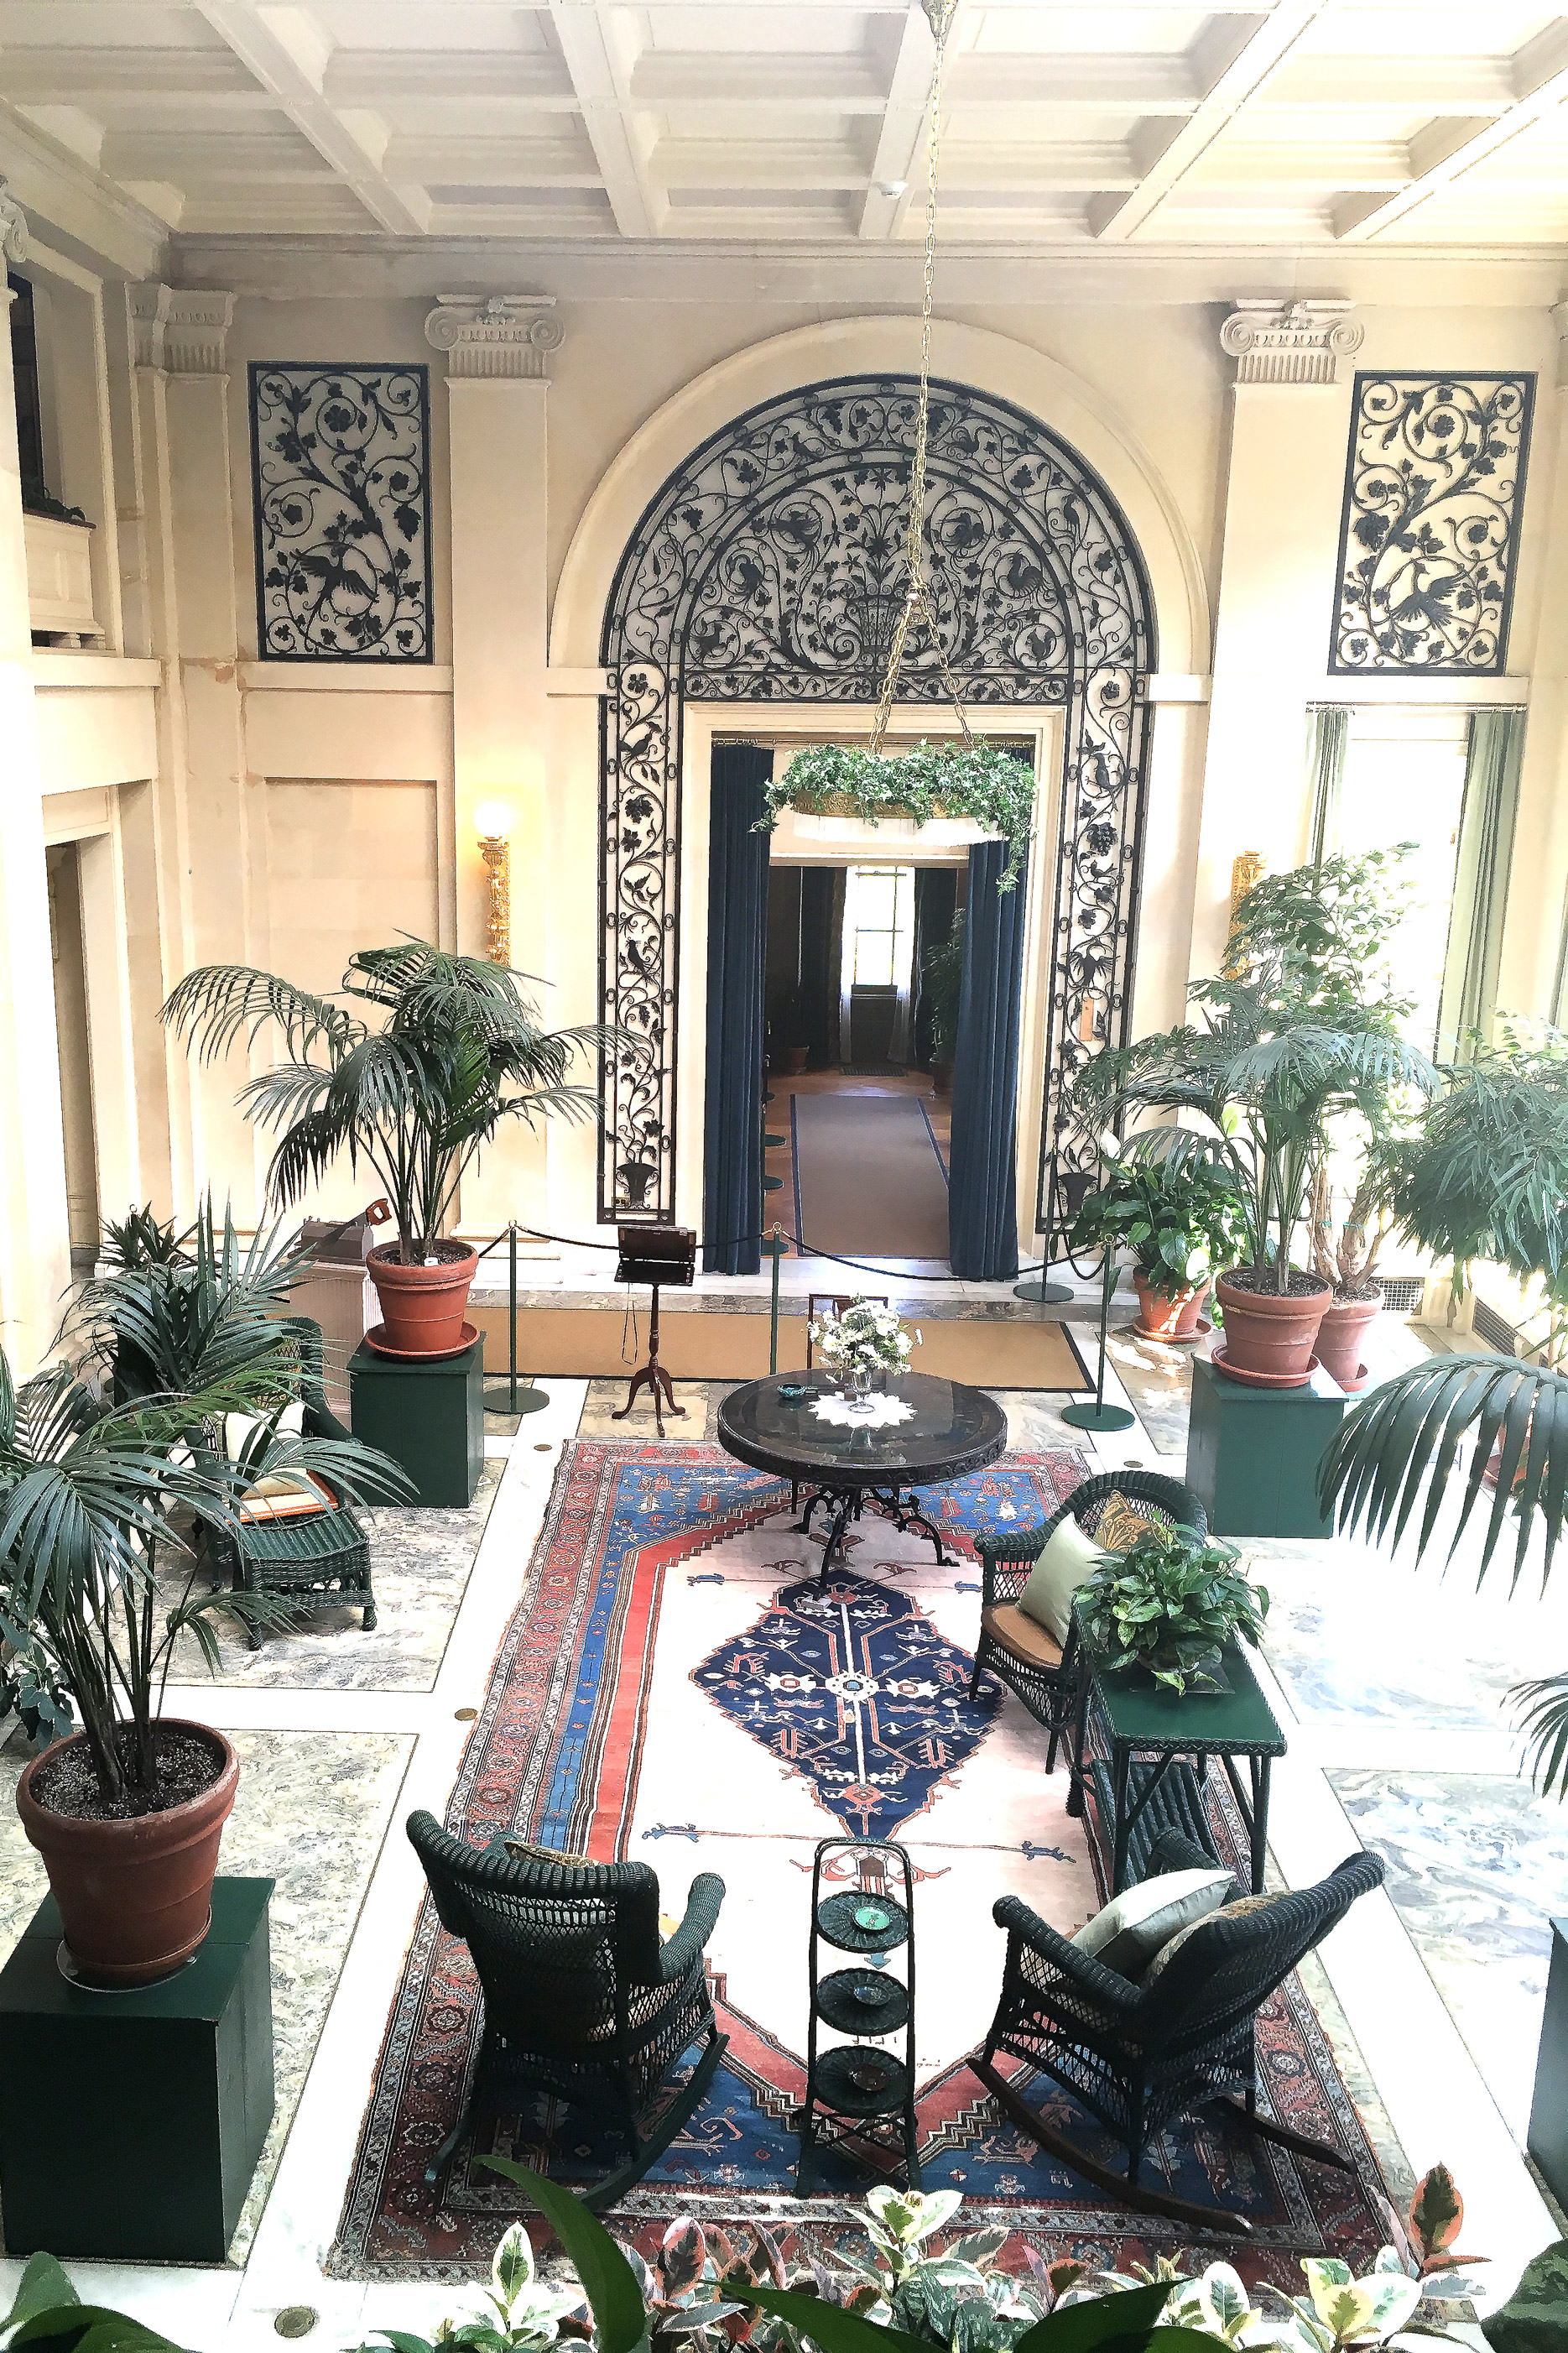 Visiting the George Eastman Mansion